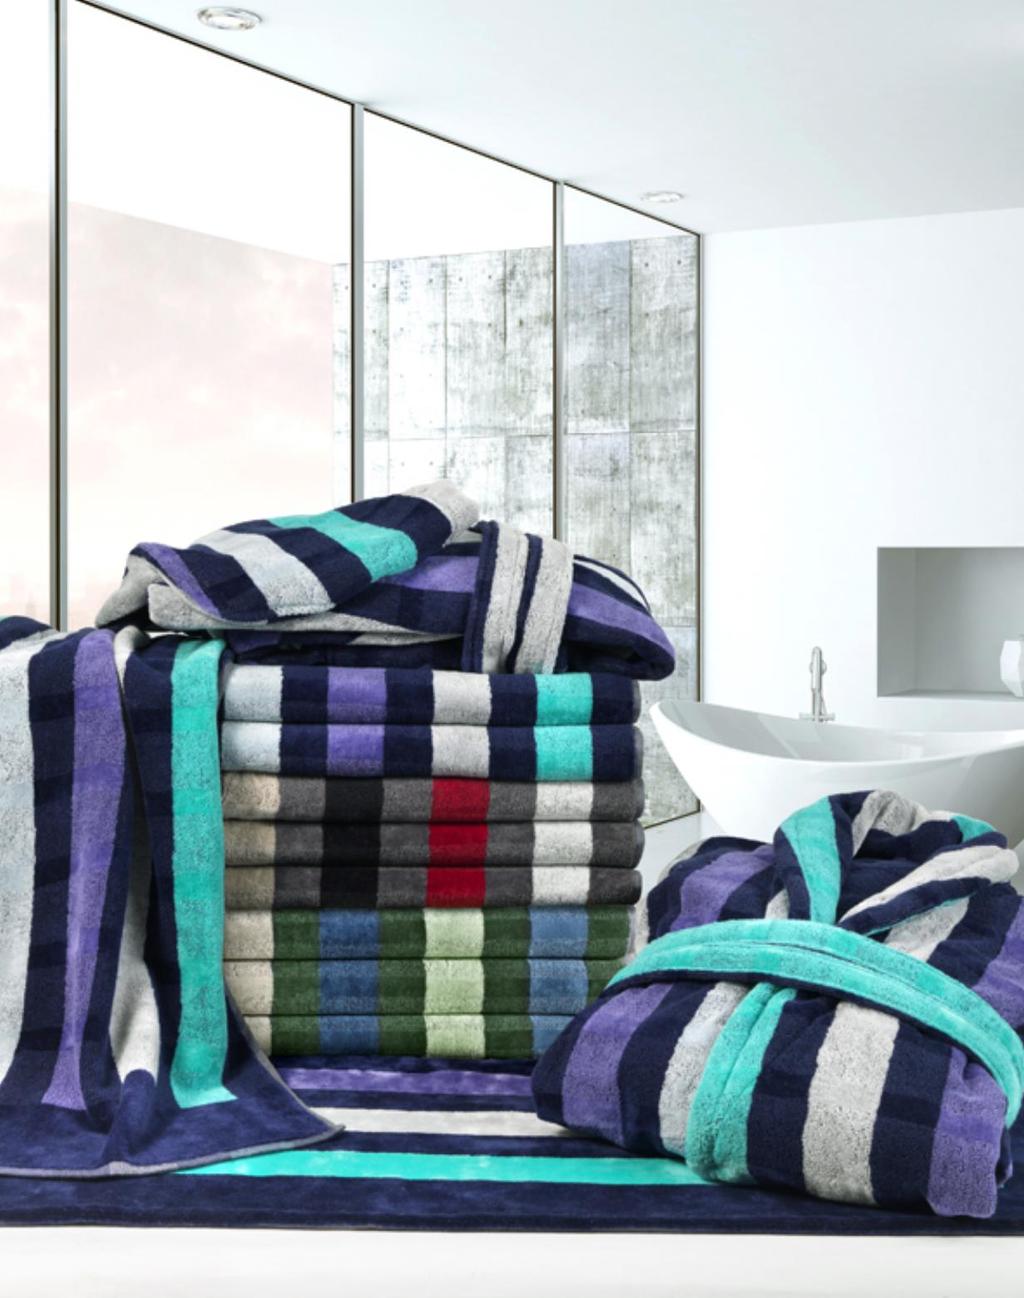 Carrara Dynamic geometries, intense colours and sartorial finishes make up an eclectic and